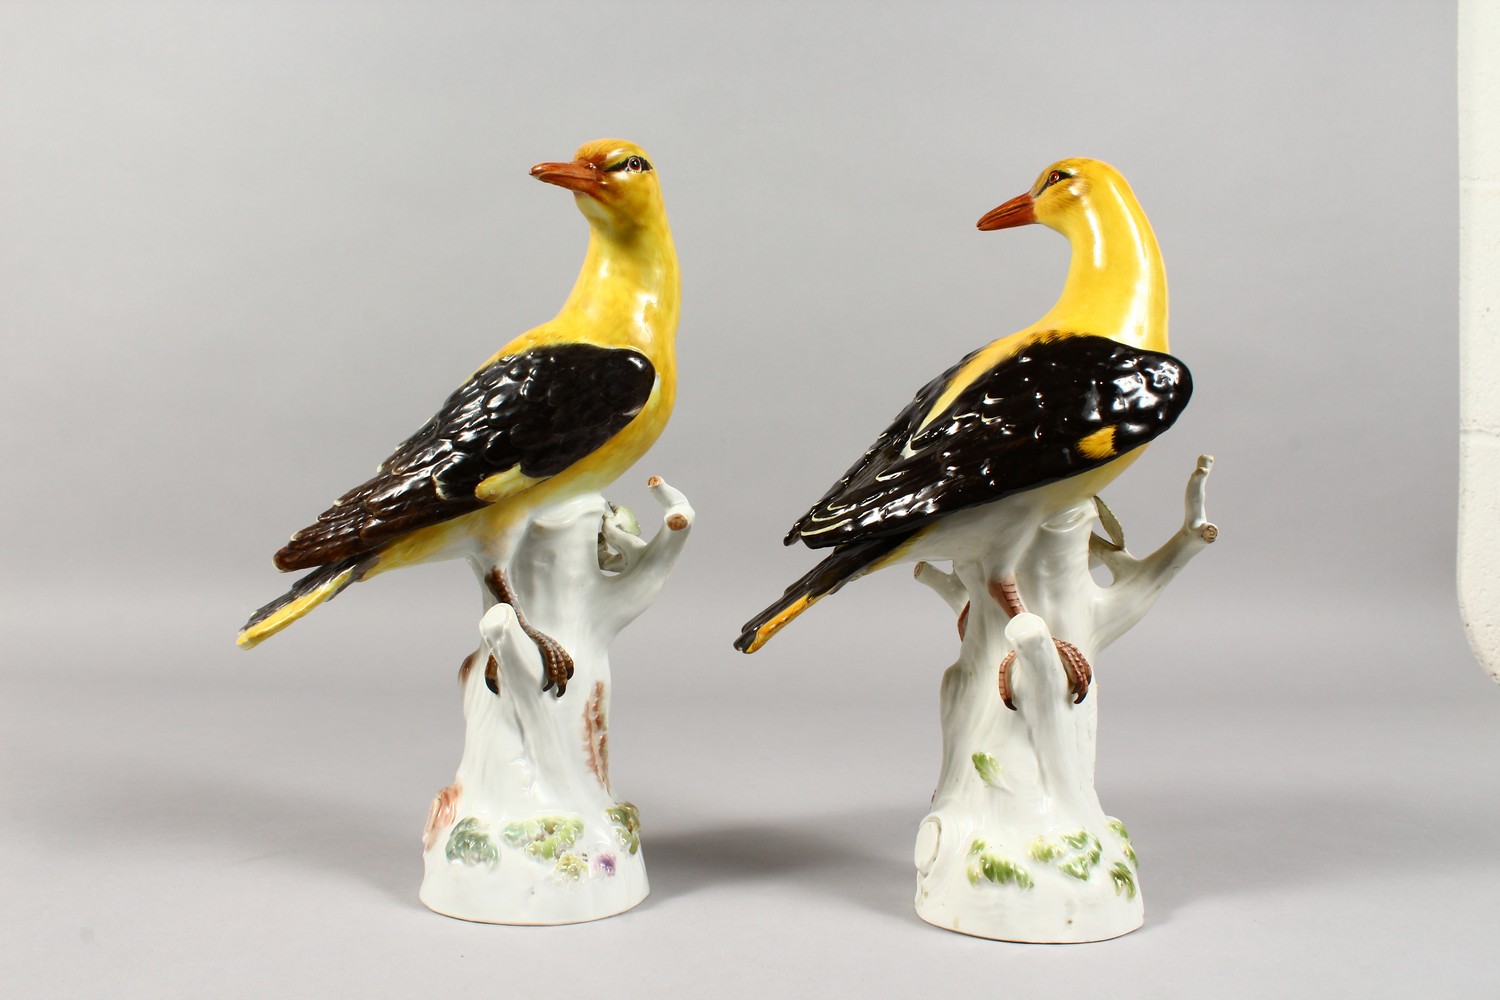 A VERY GOOD PAIR OF 19TH CENTURY MEISSEN BIRDS "GOLDEN ORIOLES" standing on encrusted tree stumps. - Image 4 of 18